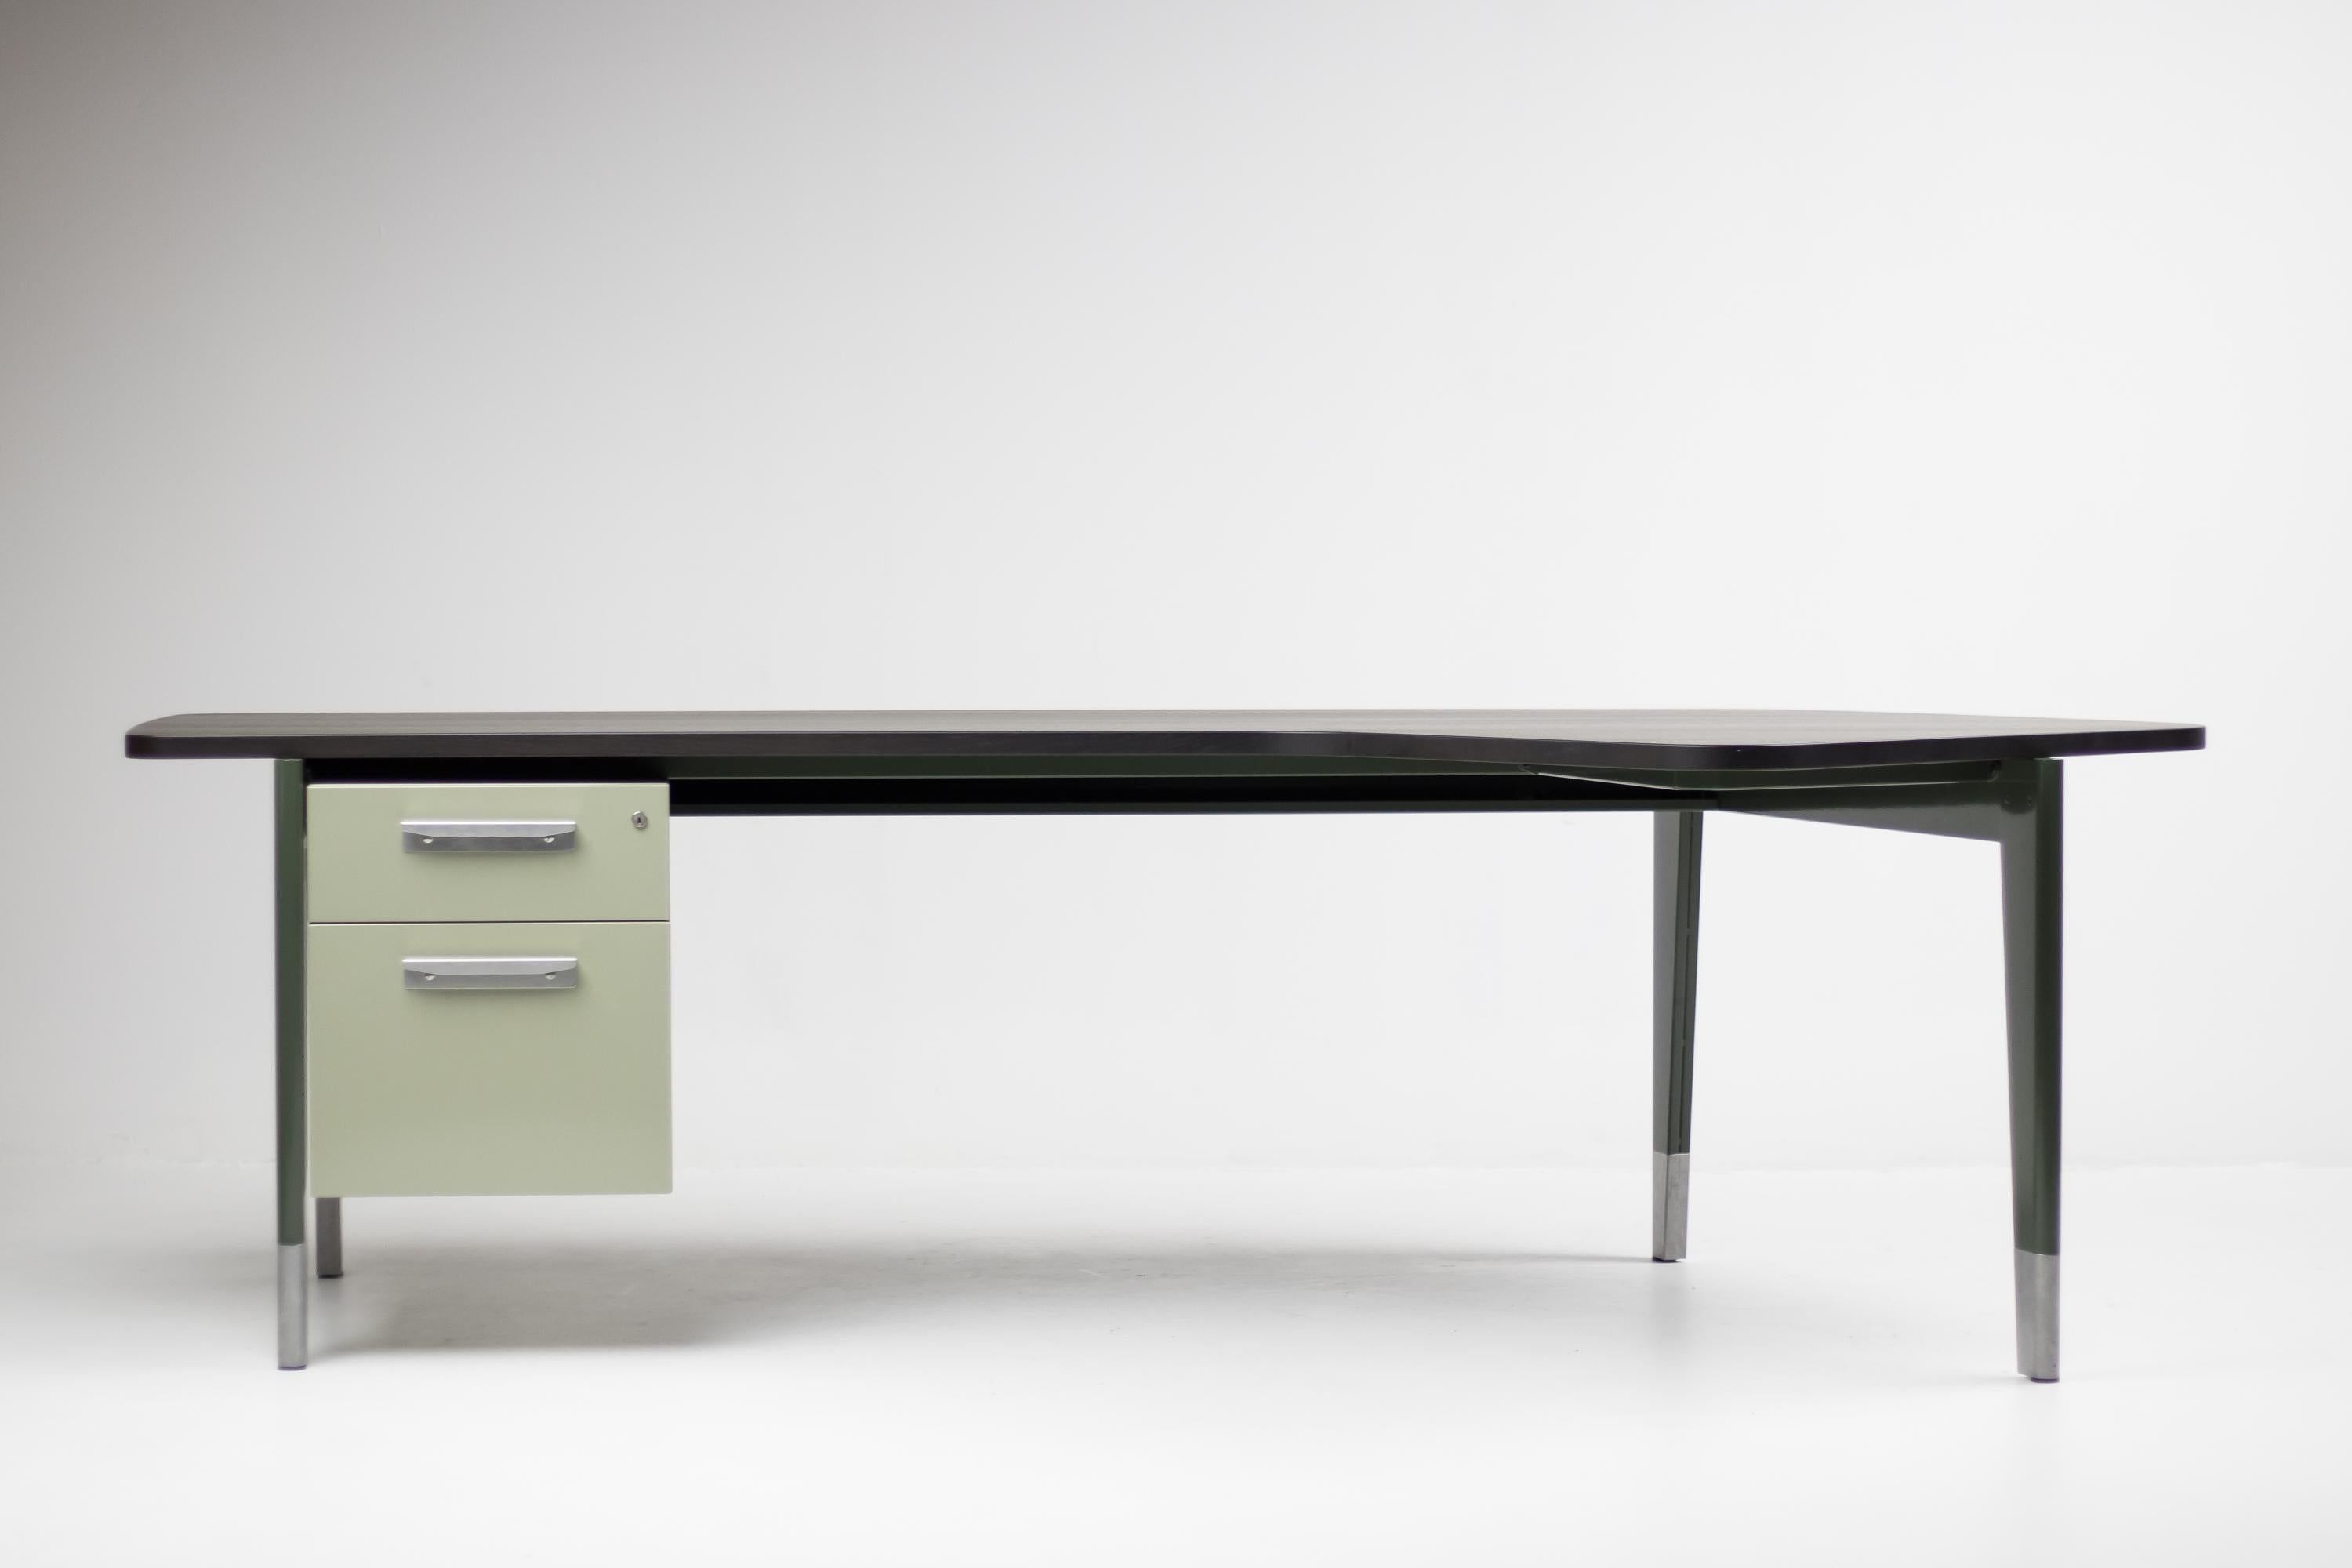 Limited edition desk from the G-Star Raw Edition made by Vitra.
G-Star ordered these desks for their new Headquarters in Amsterdam by the architect Rem Koolhaas.
They were also available for a limited time for other Prouvé collectors.
Marked with